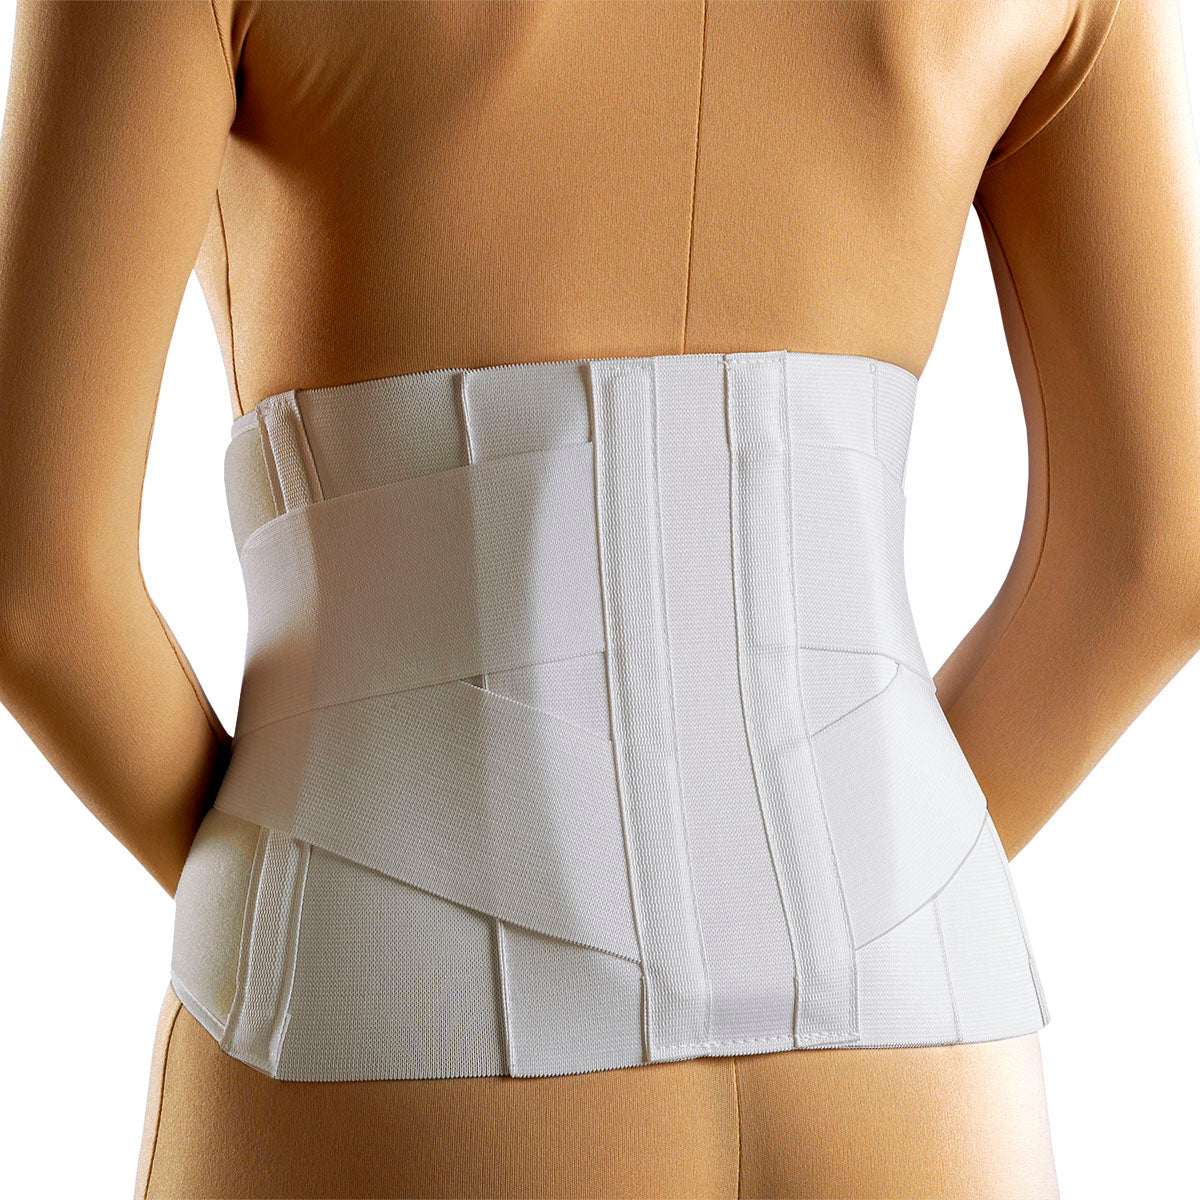 Universal Lumbar Sacral Support SCDS, Small, Fits Waist 21" -26"